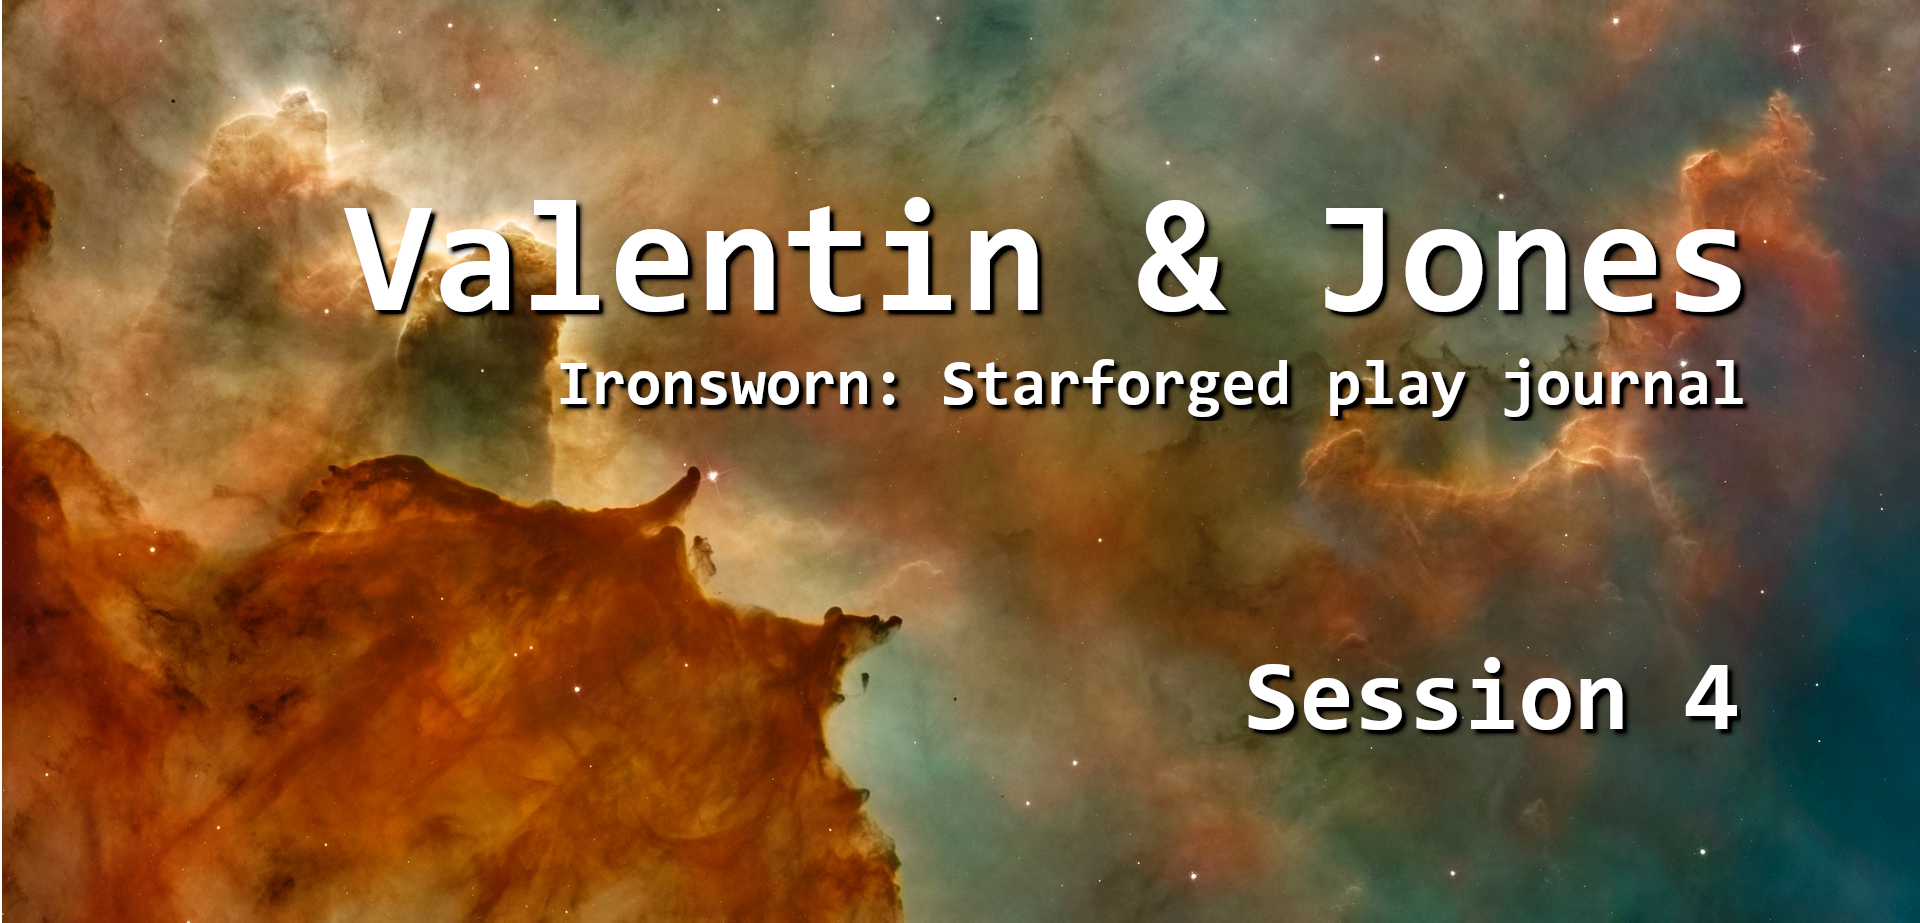 Valentin & Jones, Session 4, Starforged actual play journal